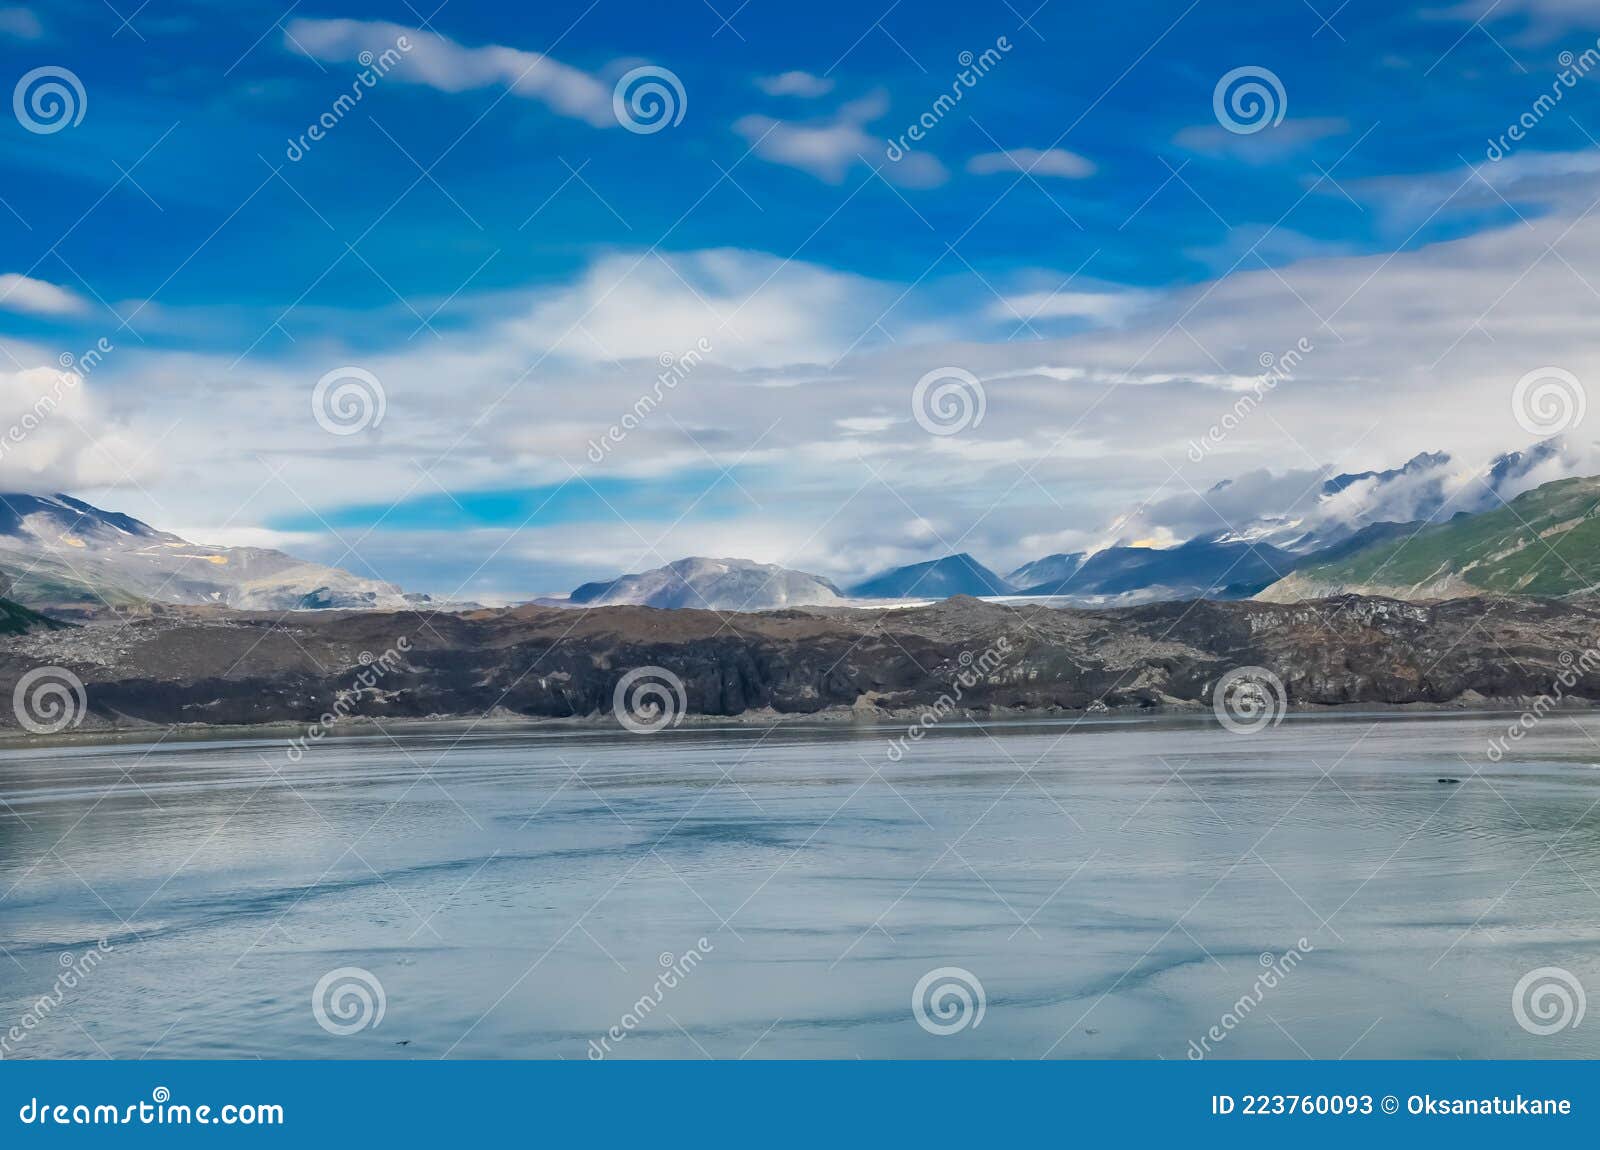 Alaska Mountains and Water, Aerial Perspective View. Mountains in the Water. Remote Location Stock Image - Image of green, mountains: 223760093